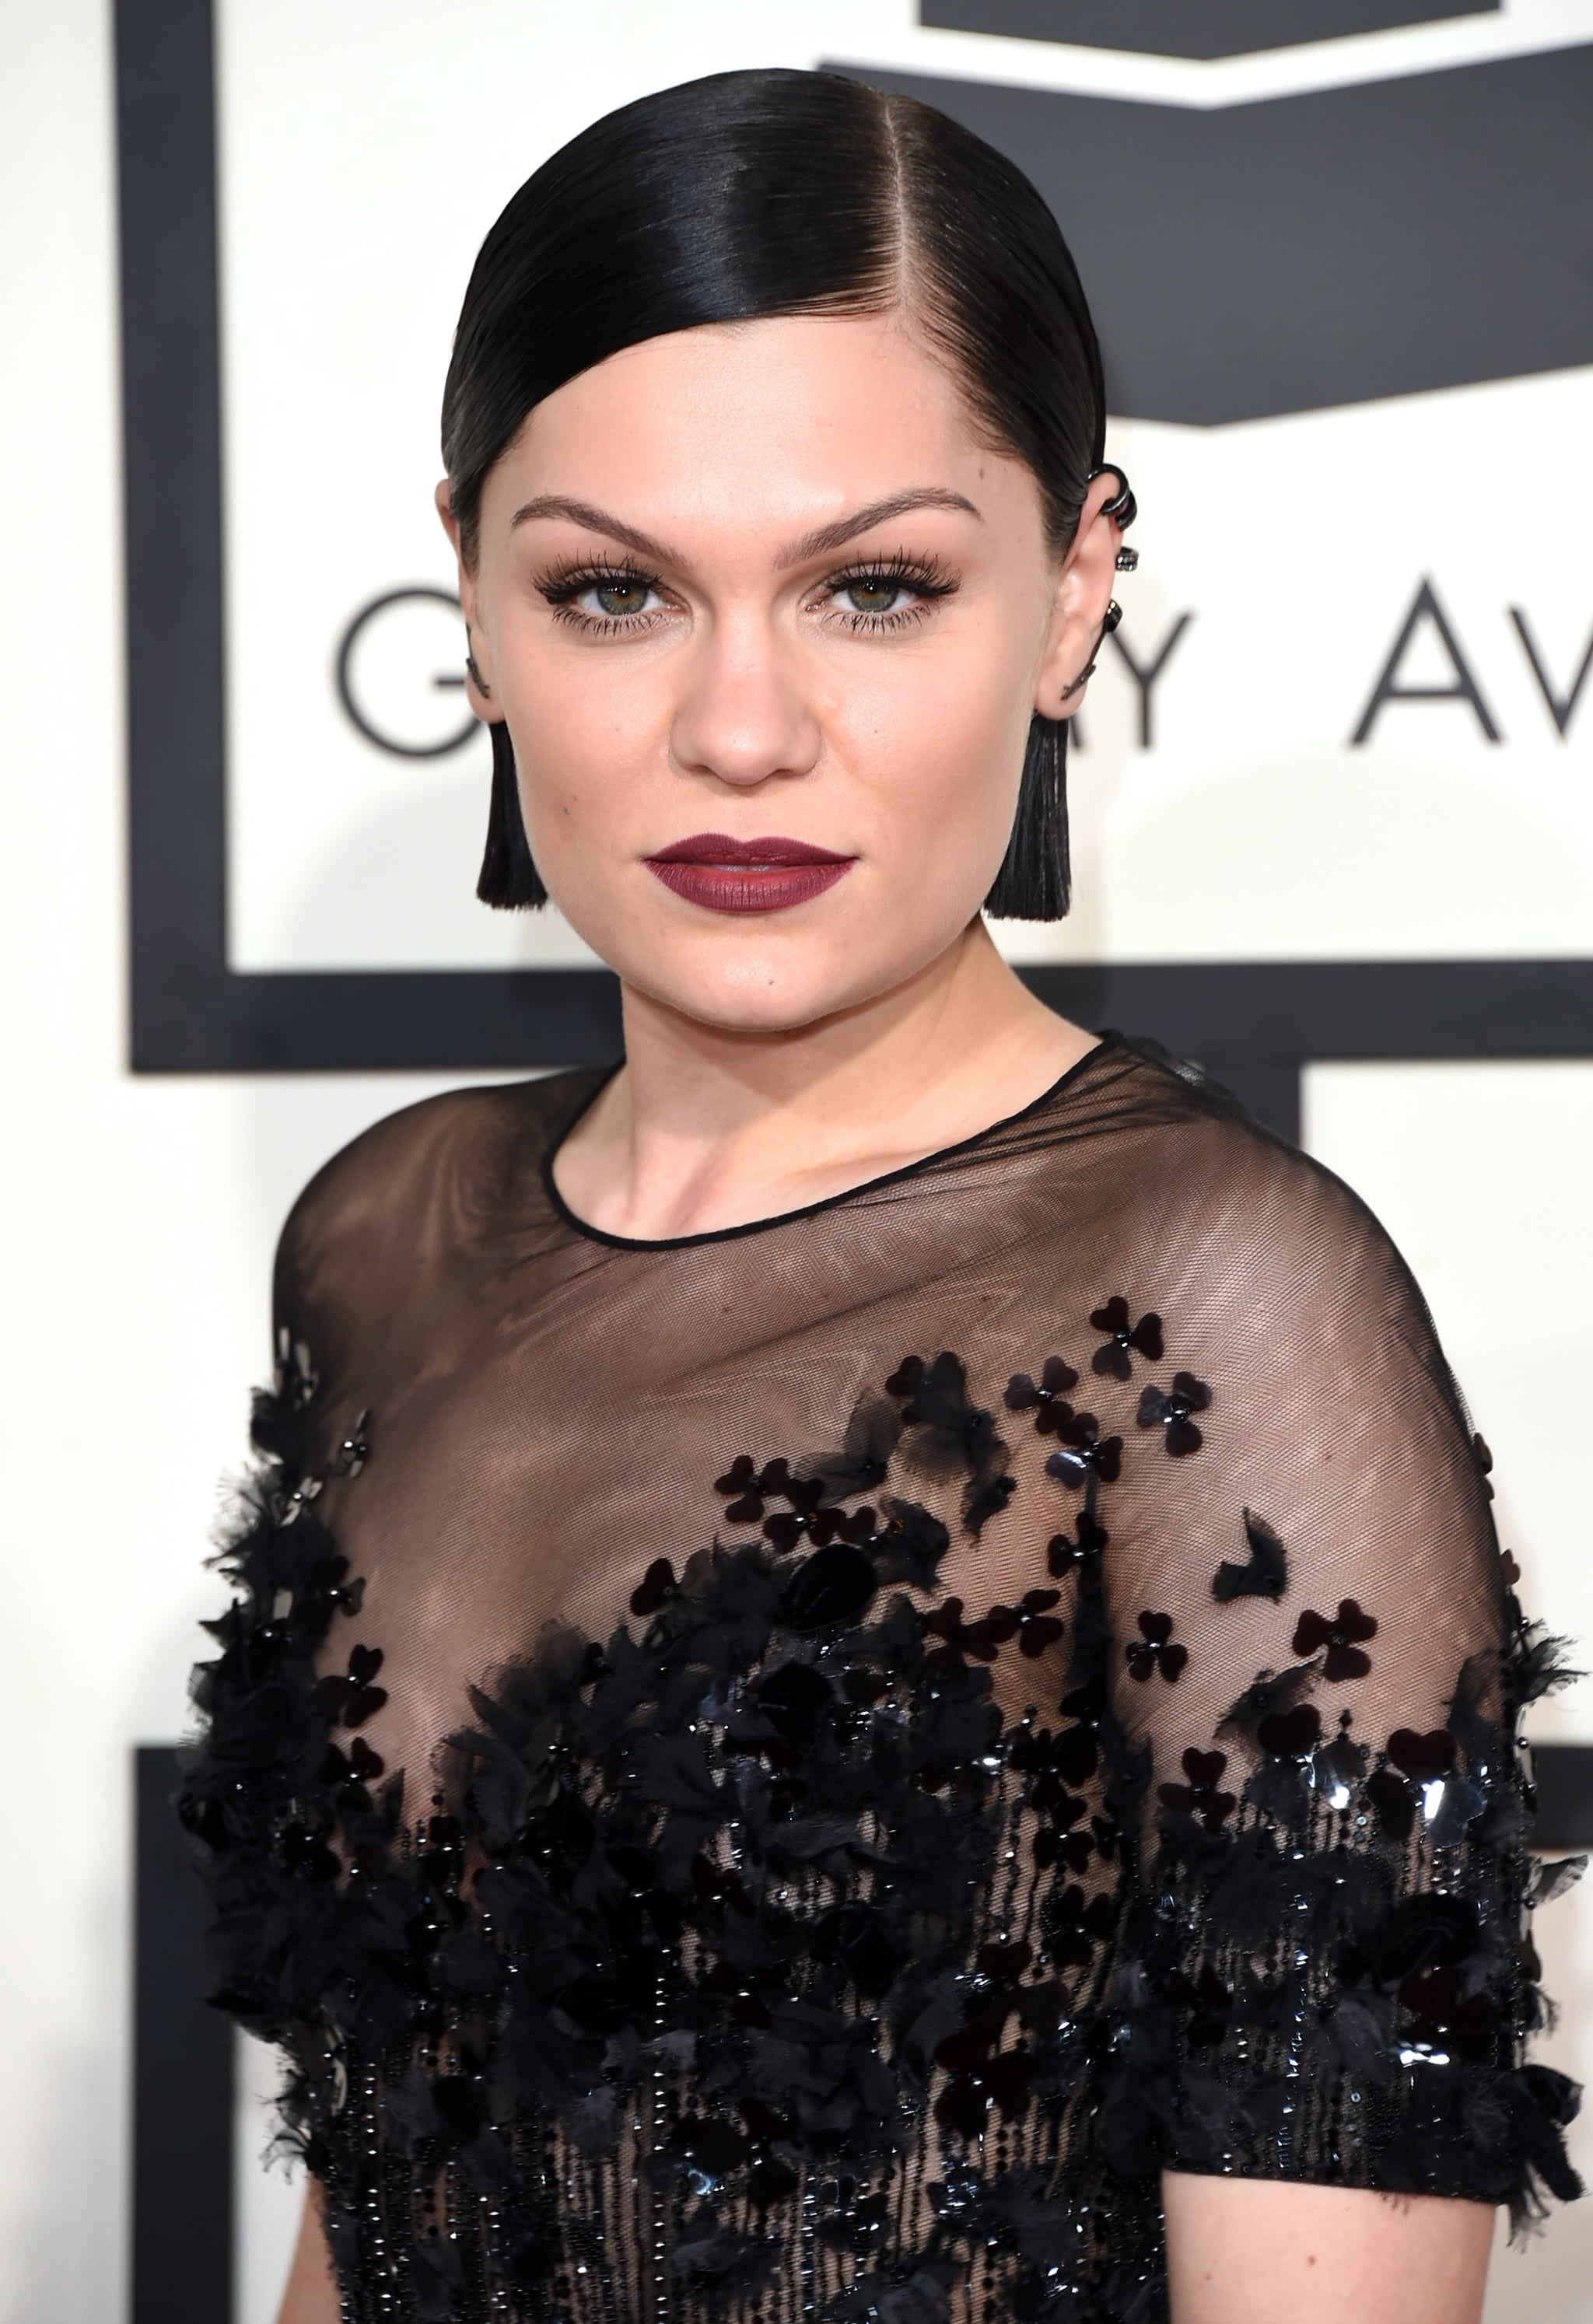 Jessie Js supertight ponytail  celebrity hair and hairstyles  Glamour UK